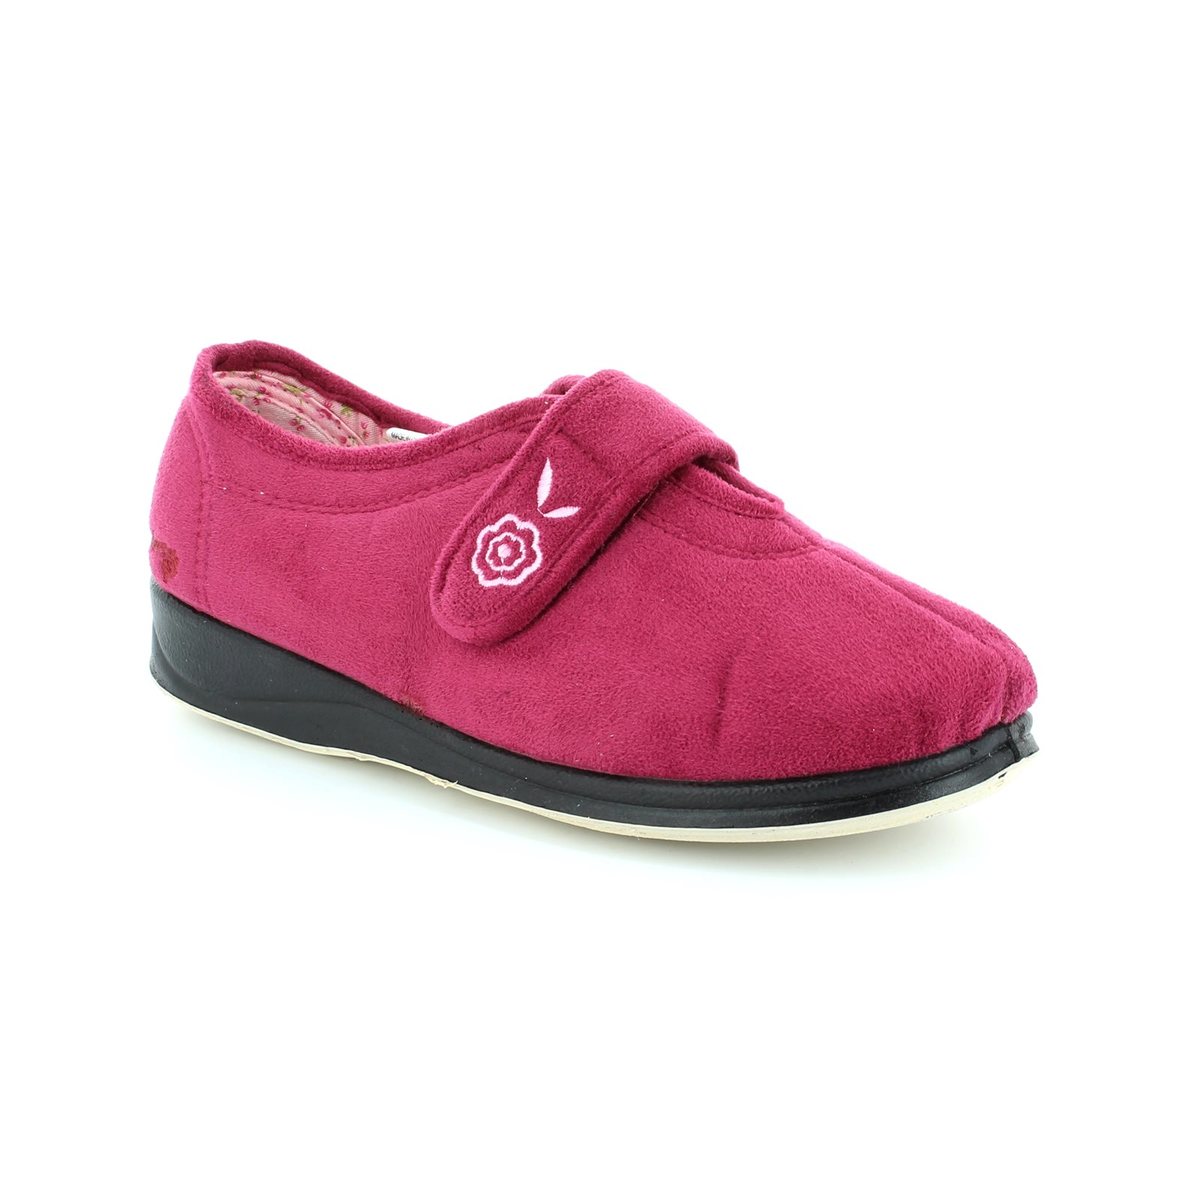 Padders Camilla Fuchsia Womens slippers 447-69 in a Plain Microsuede in Size 3